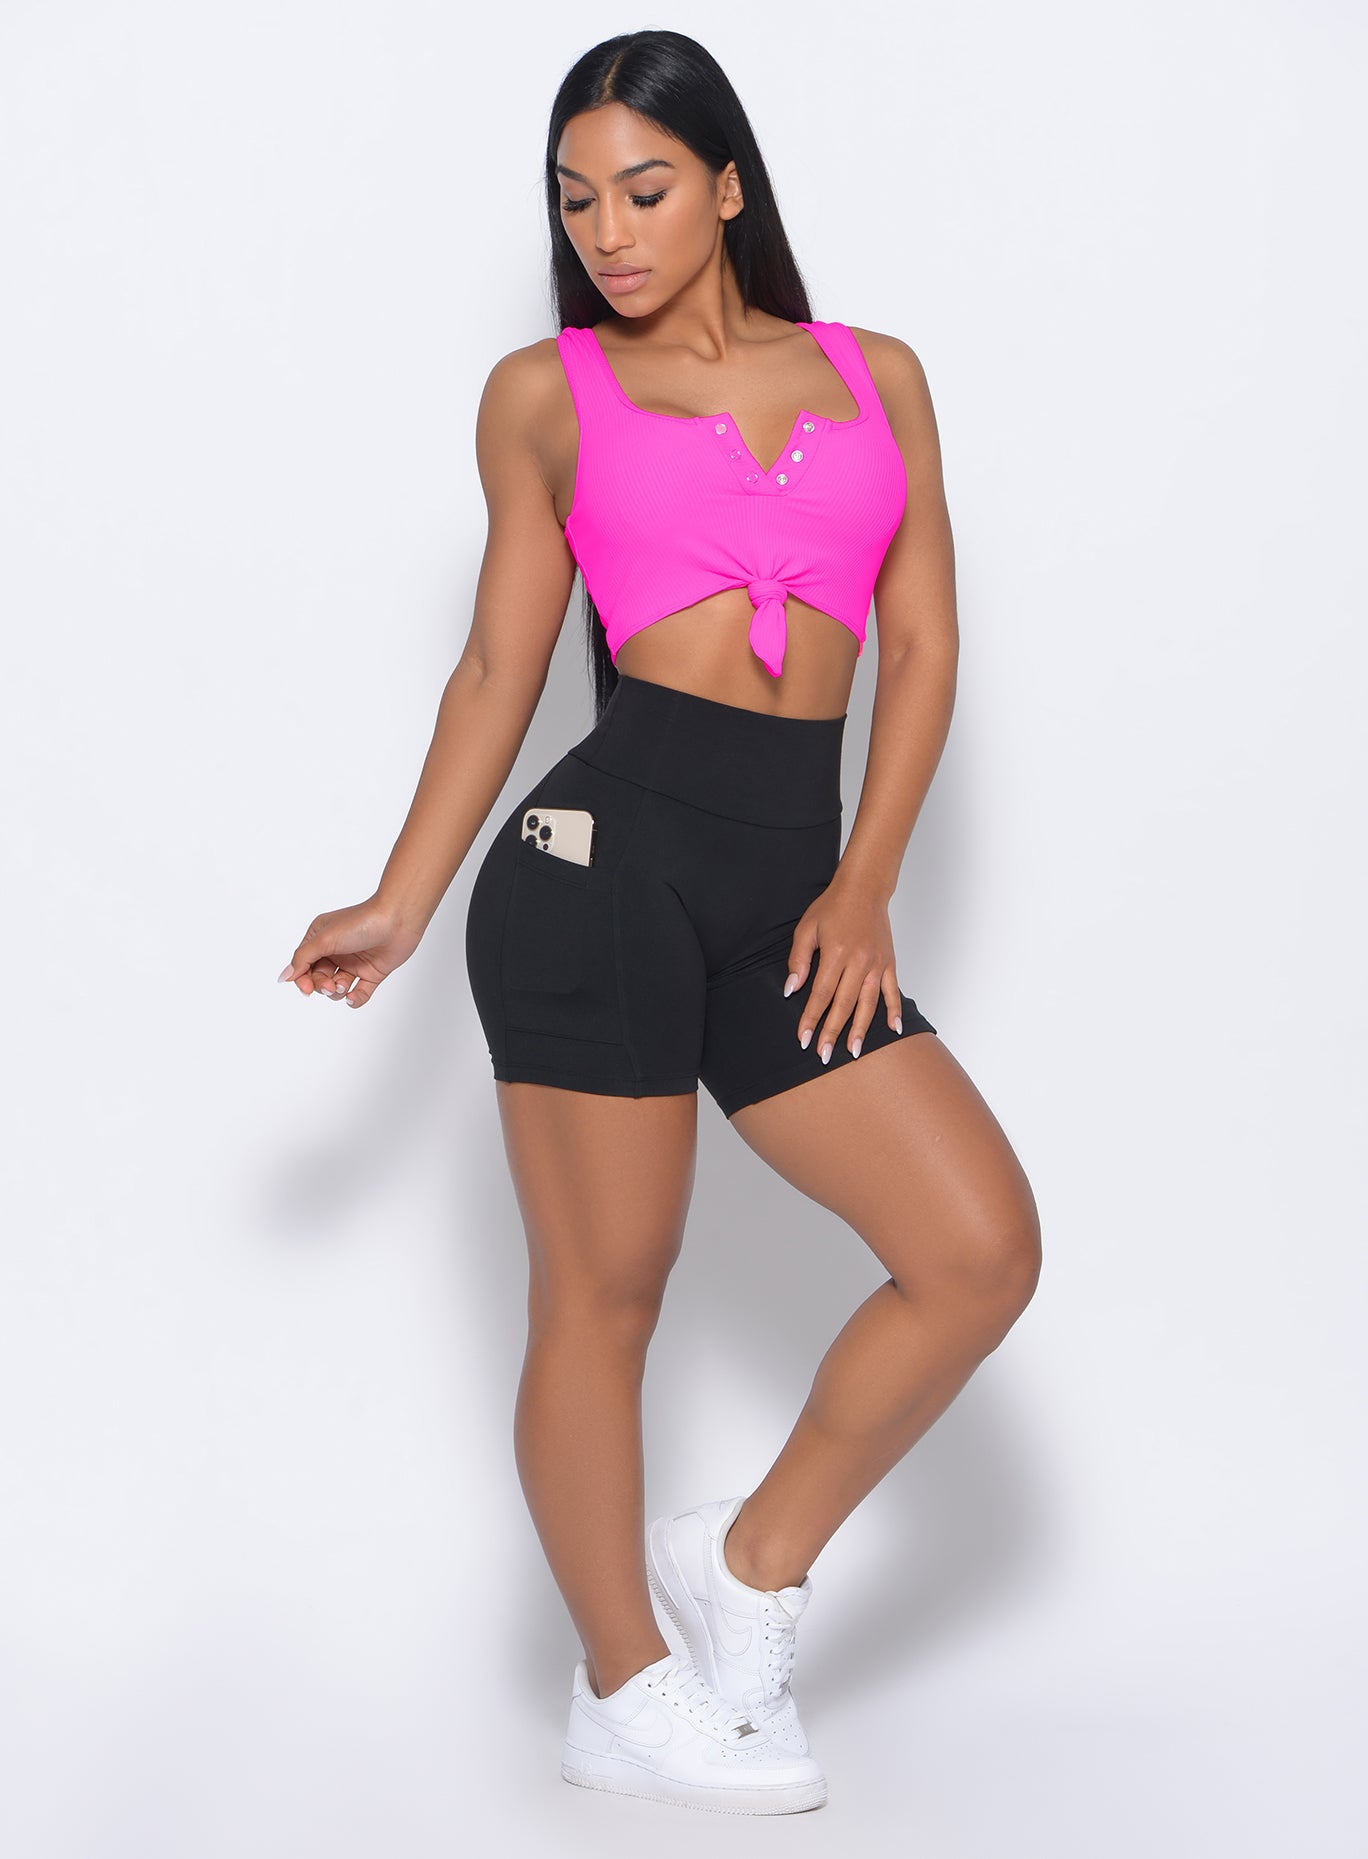 Front profile view of the model wearing our black pocket biker shorts and a neon pink bra